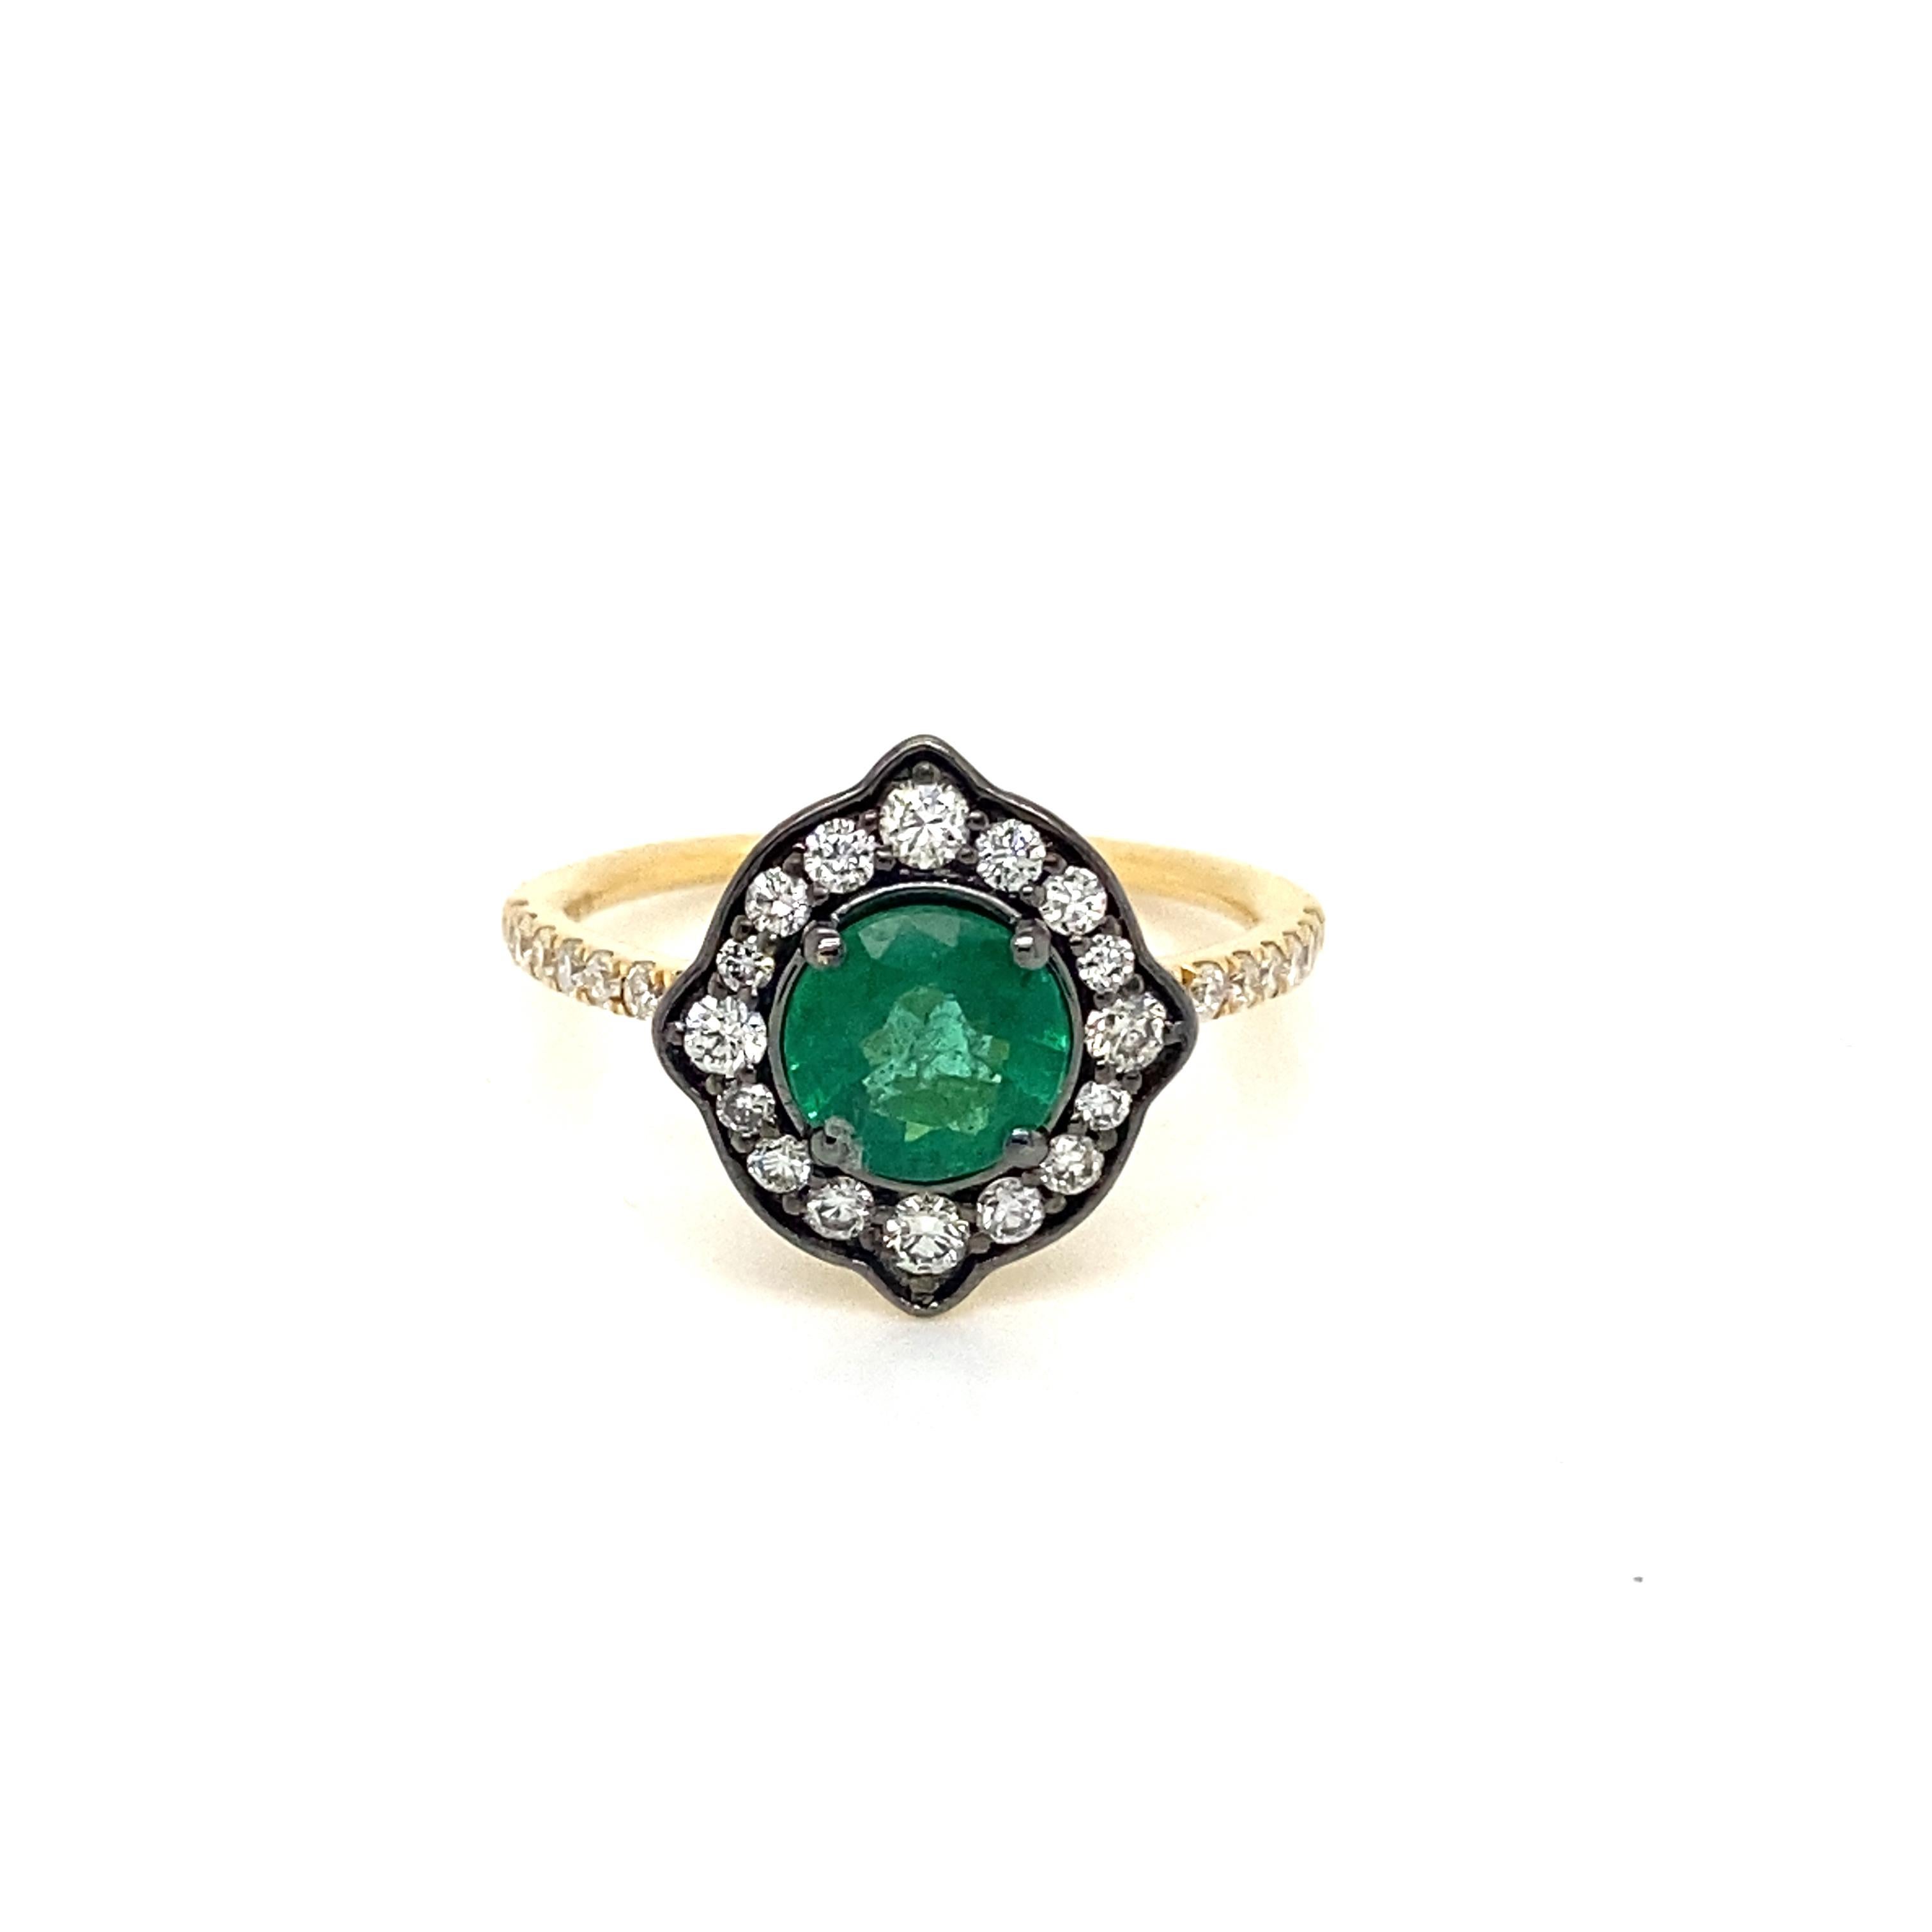 This stunning Cocktail Ring features a beautiful 0.95 Carat Round Emerald surrounded by Radiant Round White Diamonds, that sits on a Diamond Shank. This Ring is set in 18K Yellow Gold. Total Diamond Weight = 0.48 carats. Ring Size is 6 1/2.